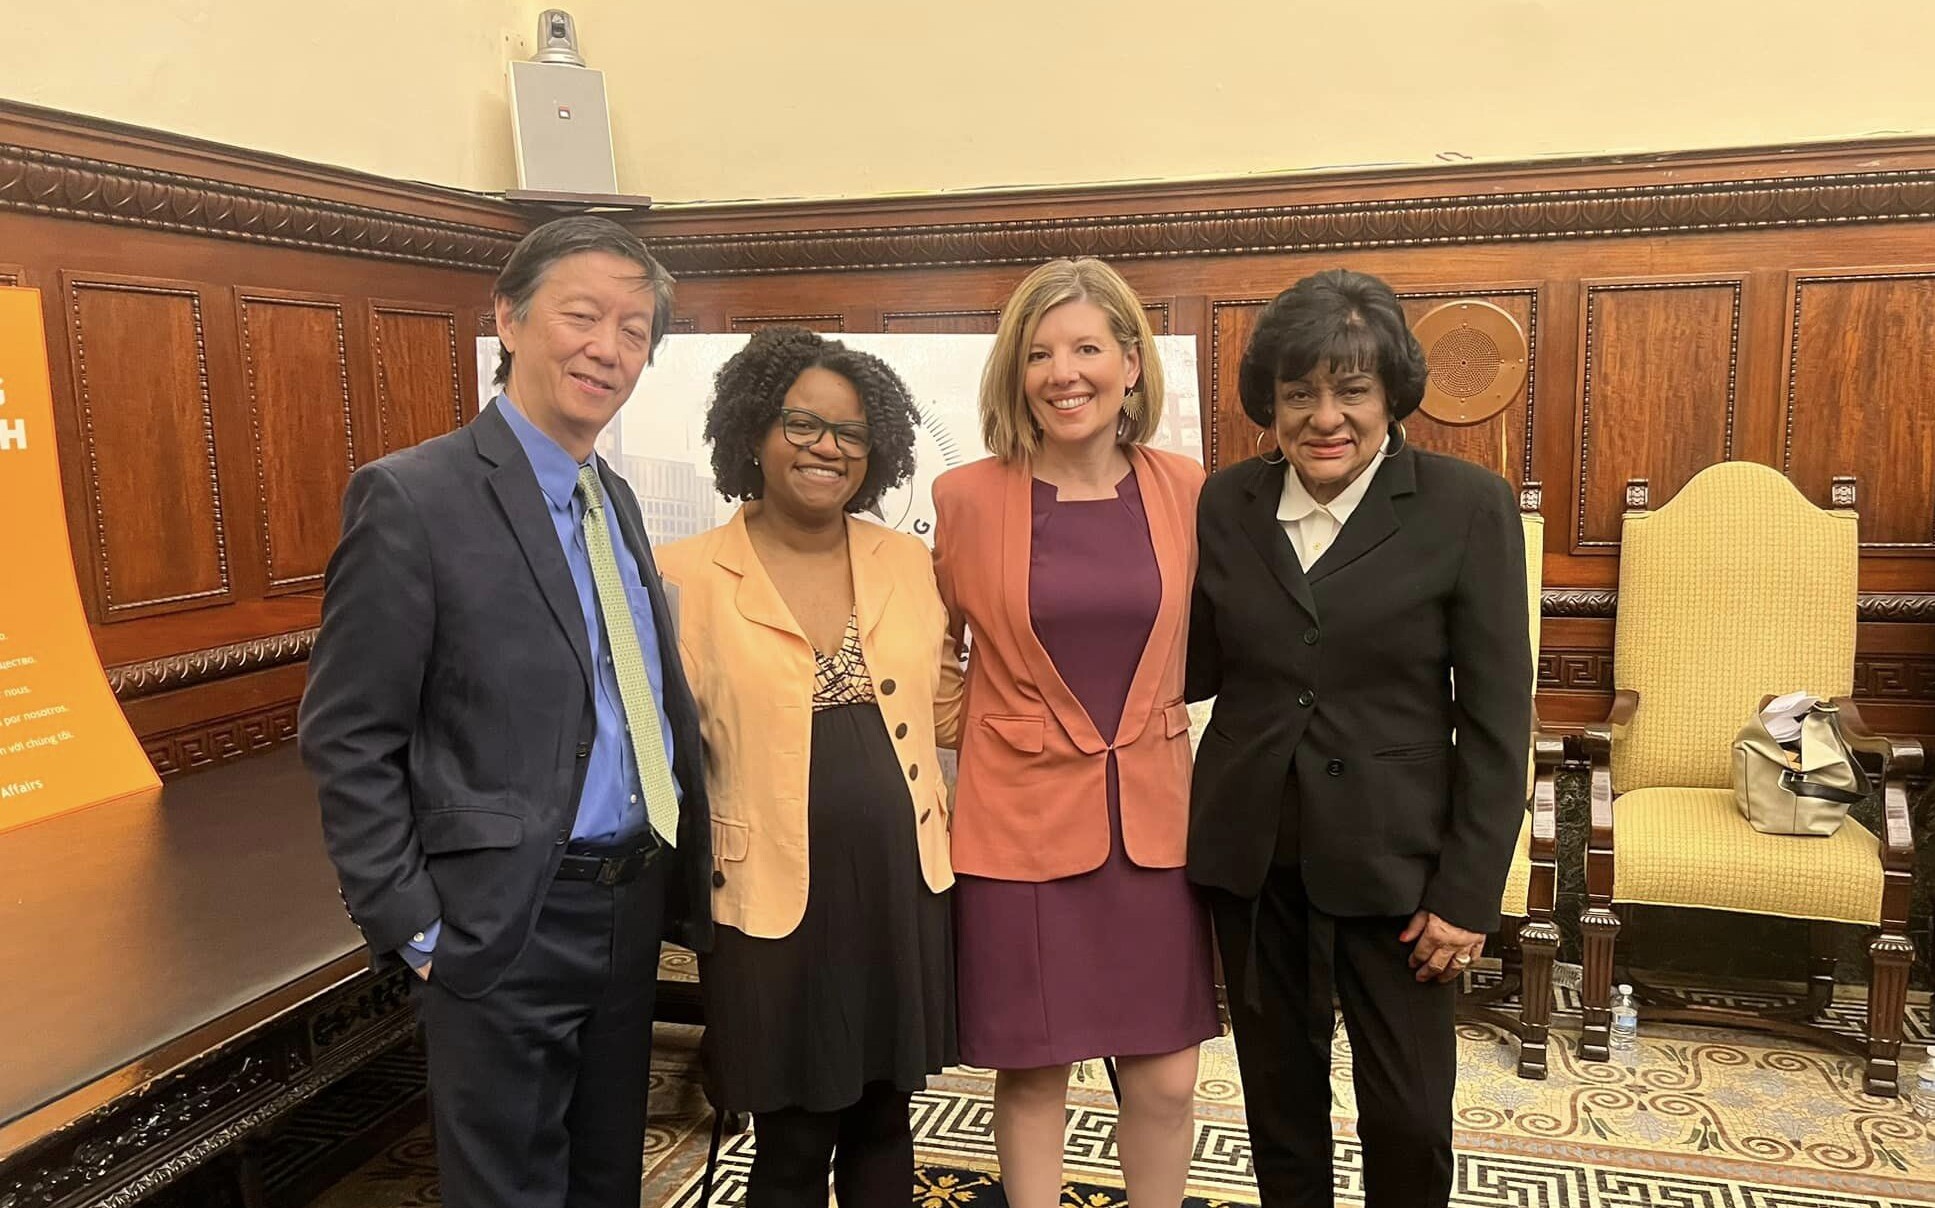 From left to right: Andy Toy, Philadelphia Mayor's Commission on Asian Pacific American Affairs; Amy Eusebio, Philadelphia Office of Immigrant Affairs; Rachel Perić, Welcoming America; and Jamie Blackwell, Philadelphia Mayor's Commission on African and Caribbean Immigrant Affairs.